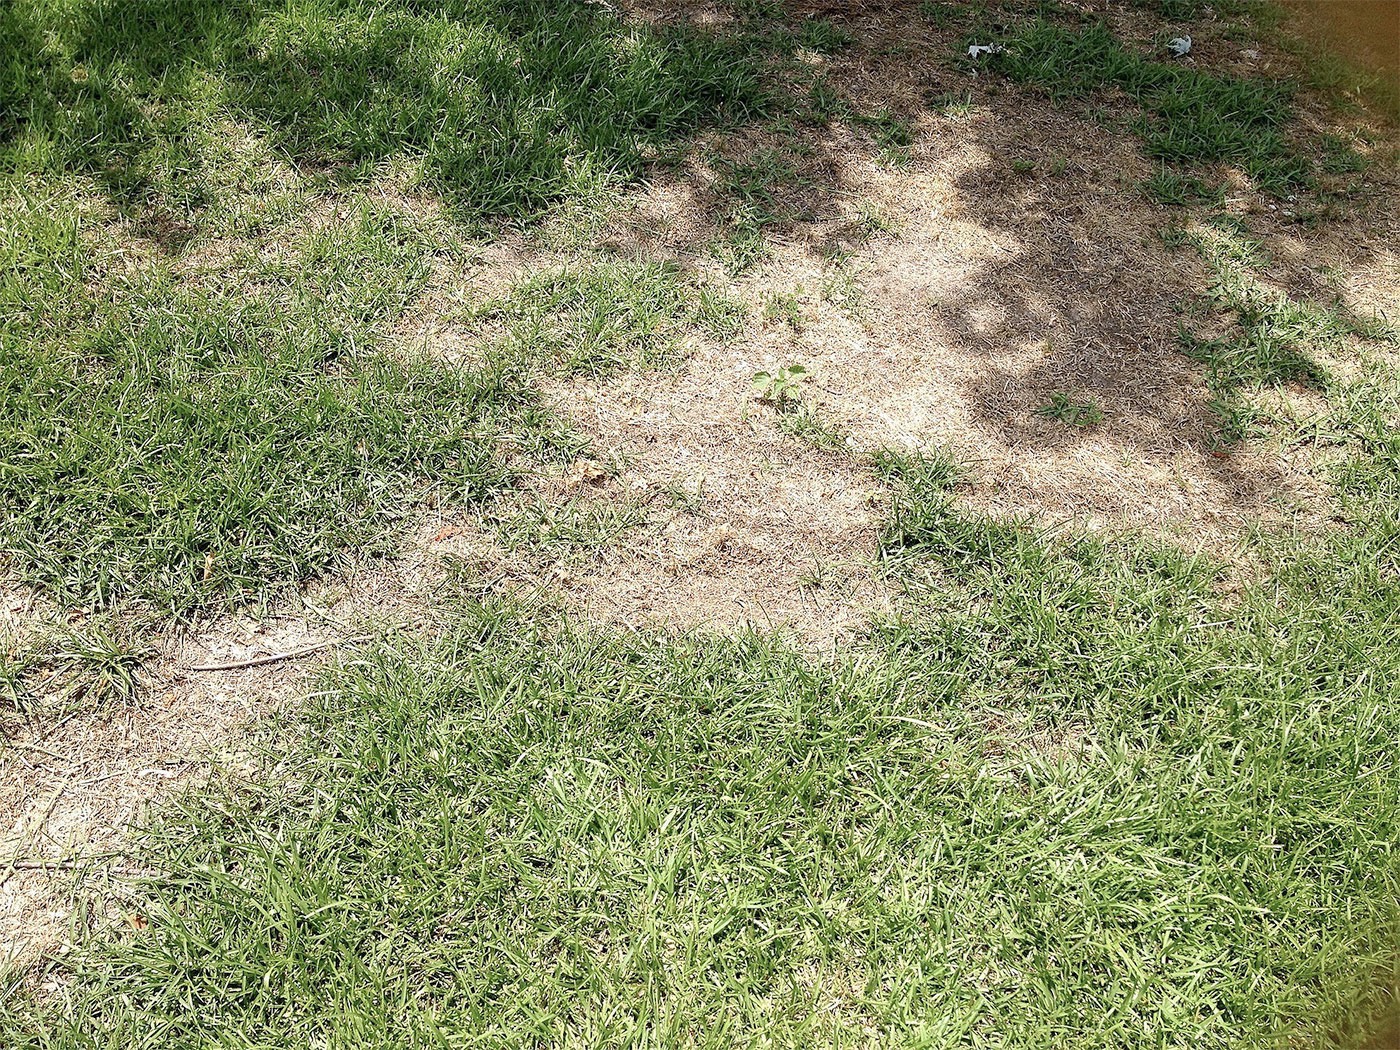 Why does my grass look so brown?